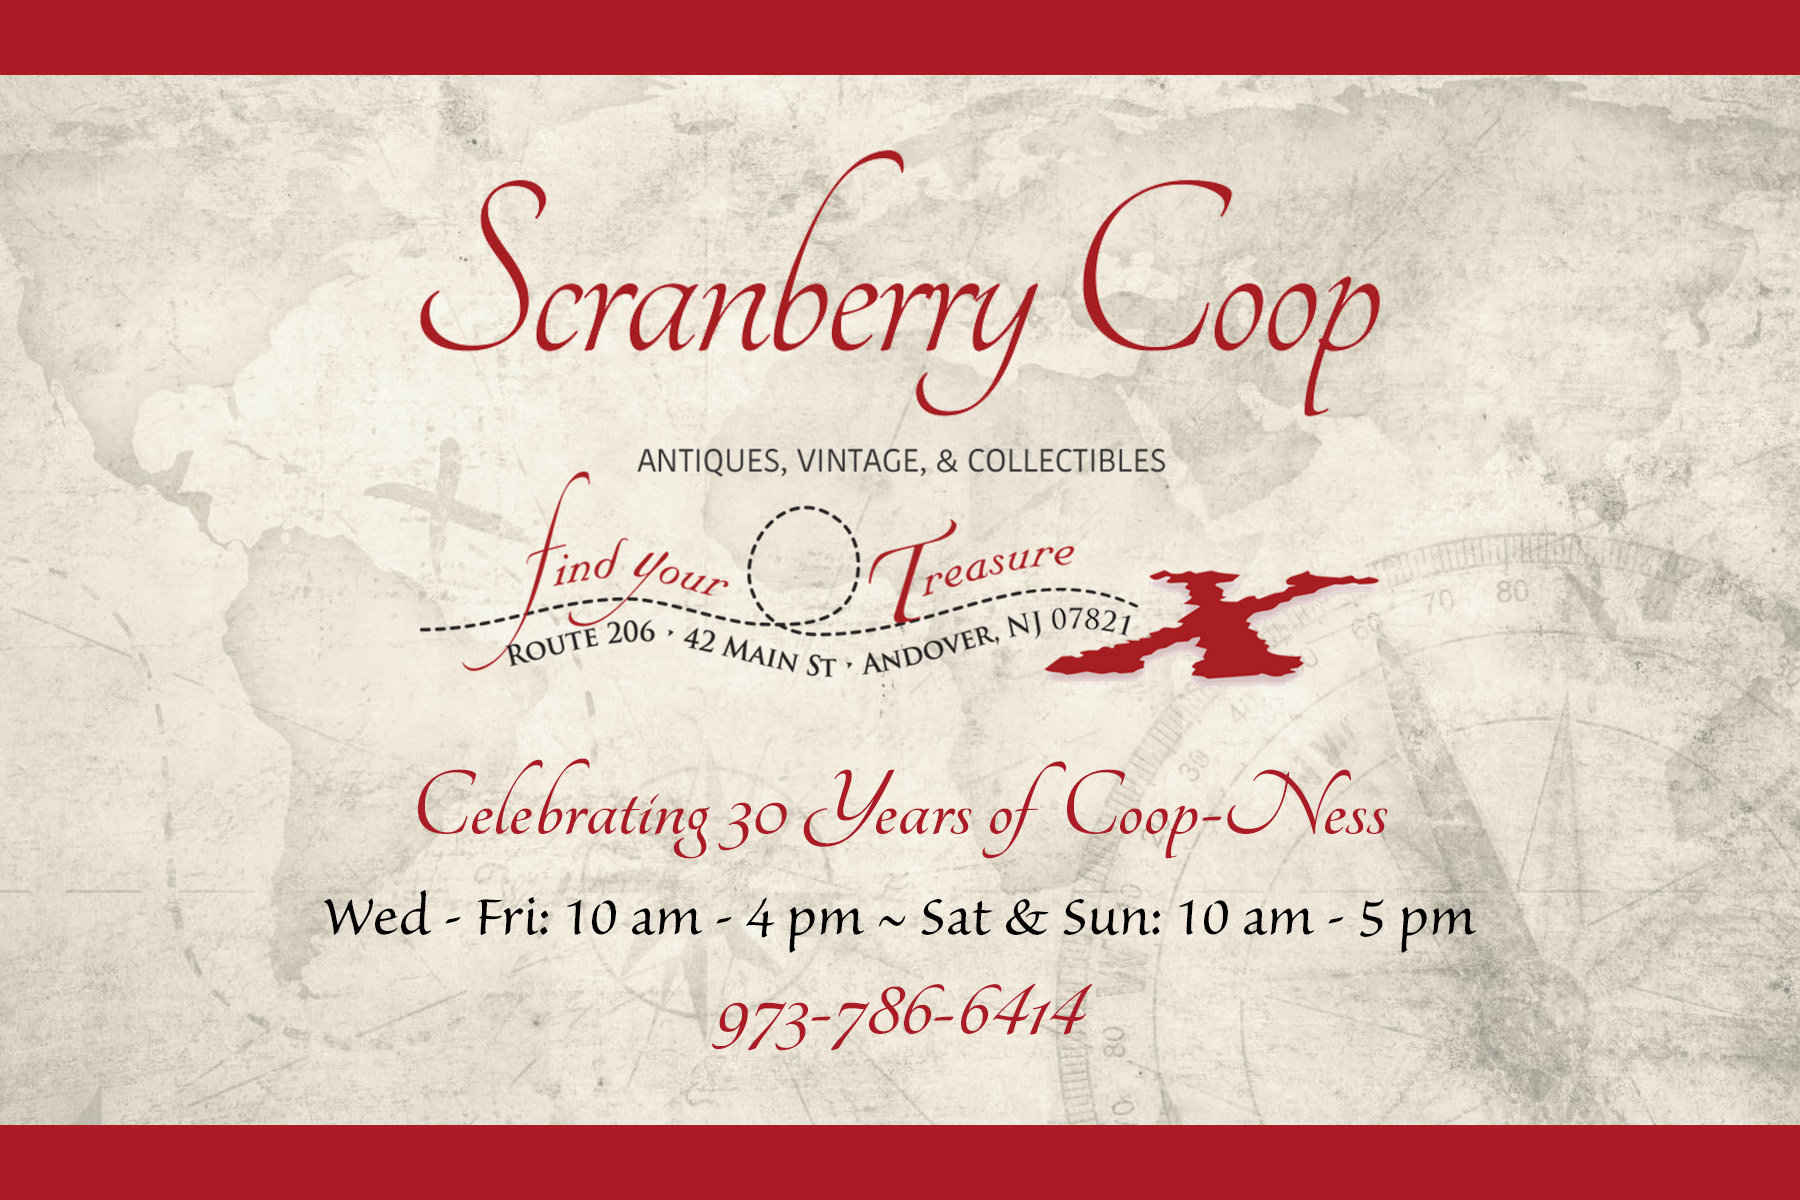 Newsletter 2017.01.02: Happy New Year from Scranberry Coop! - Scranberry Coop - Vintage Store - Antiques, Collectibles, & More